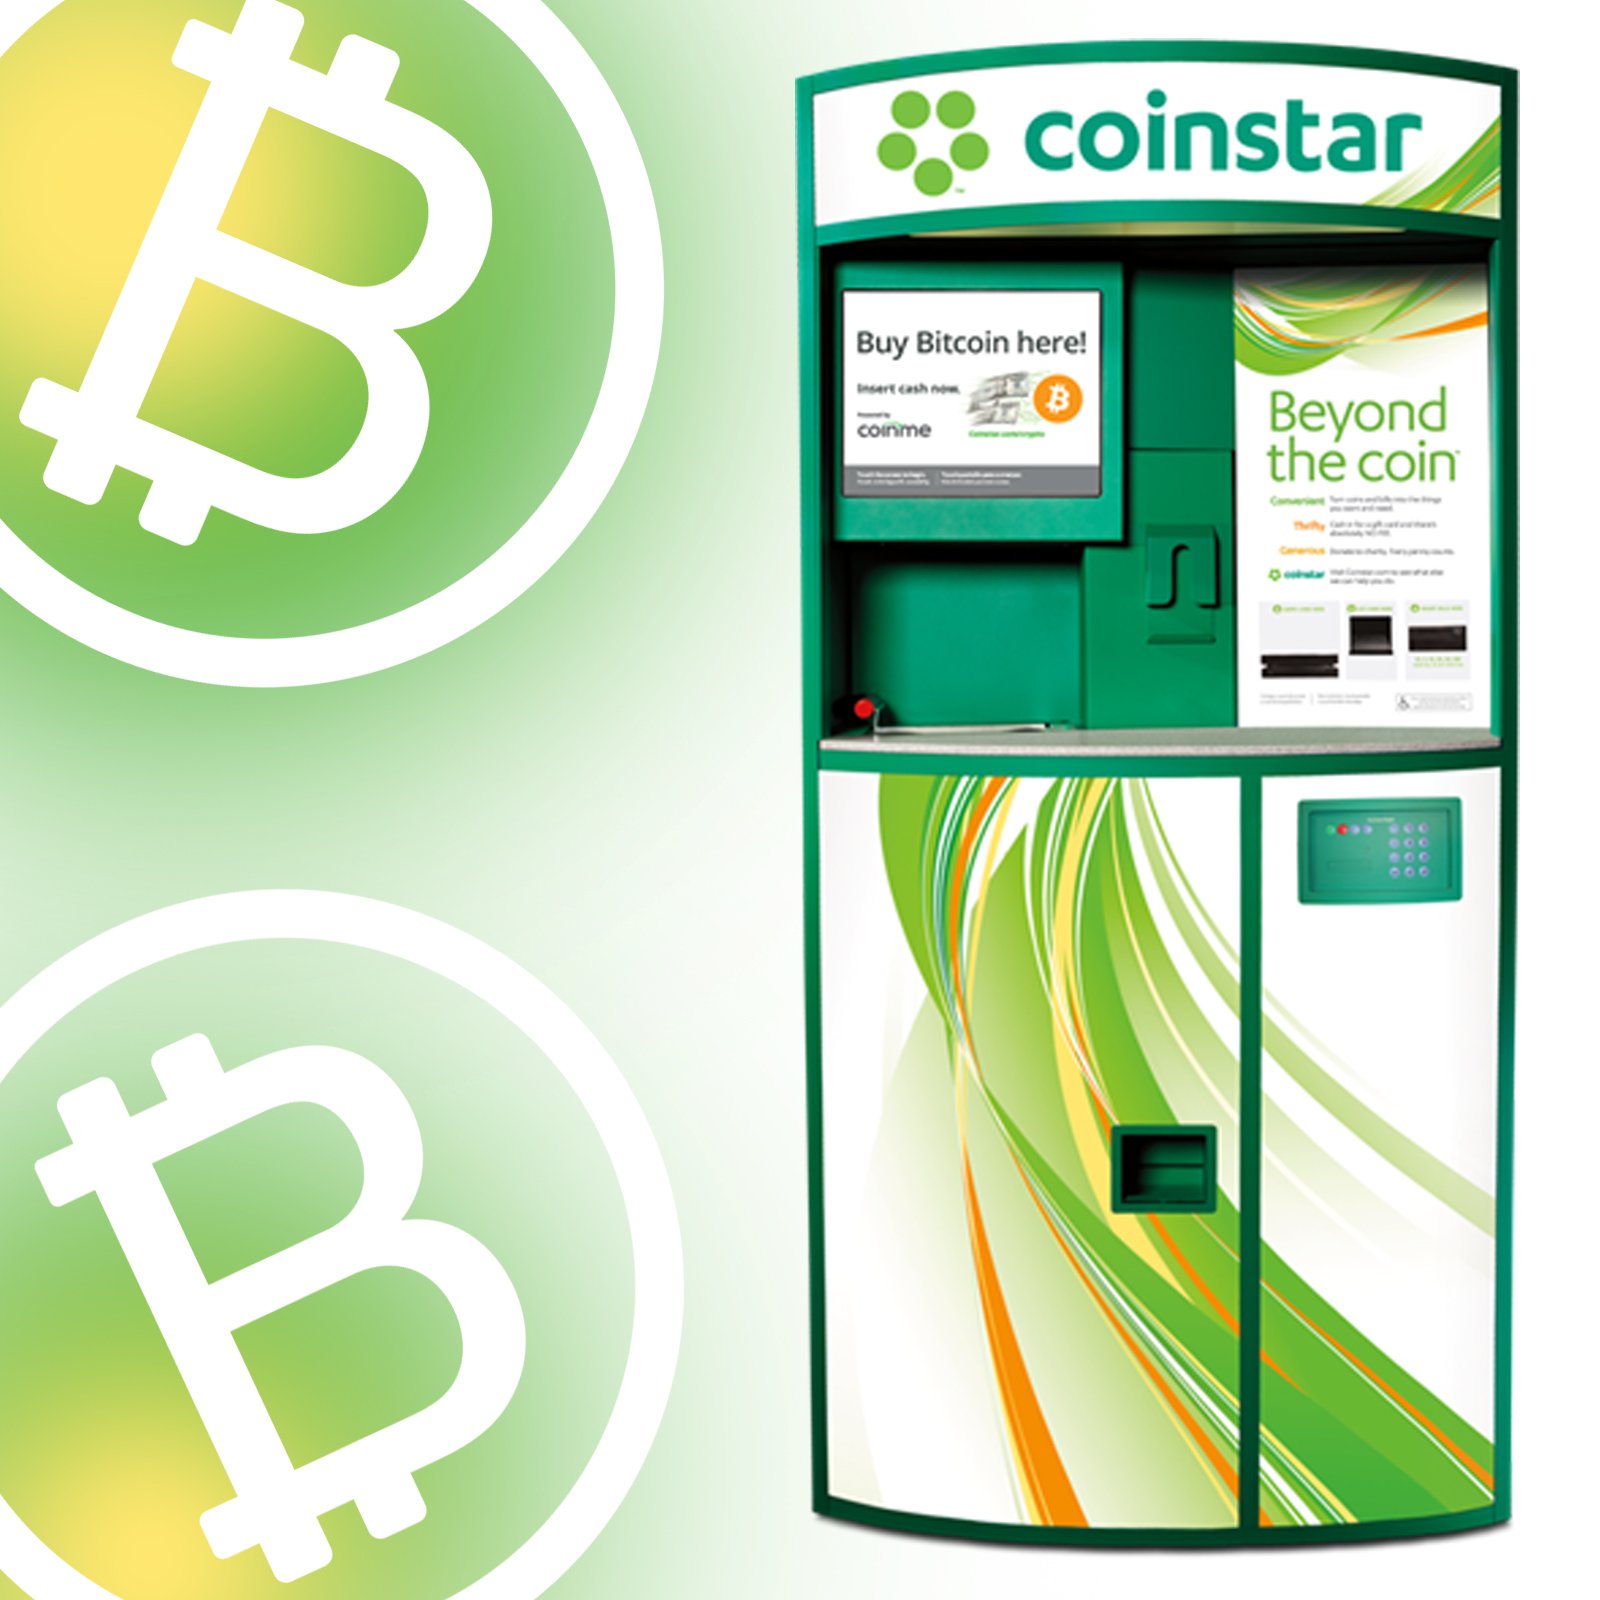 Coinstar, W Manchester Ave, Los Angeles, CA - MapQuest